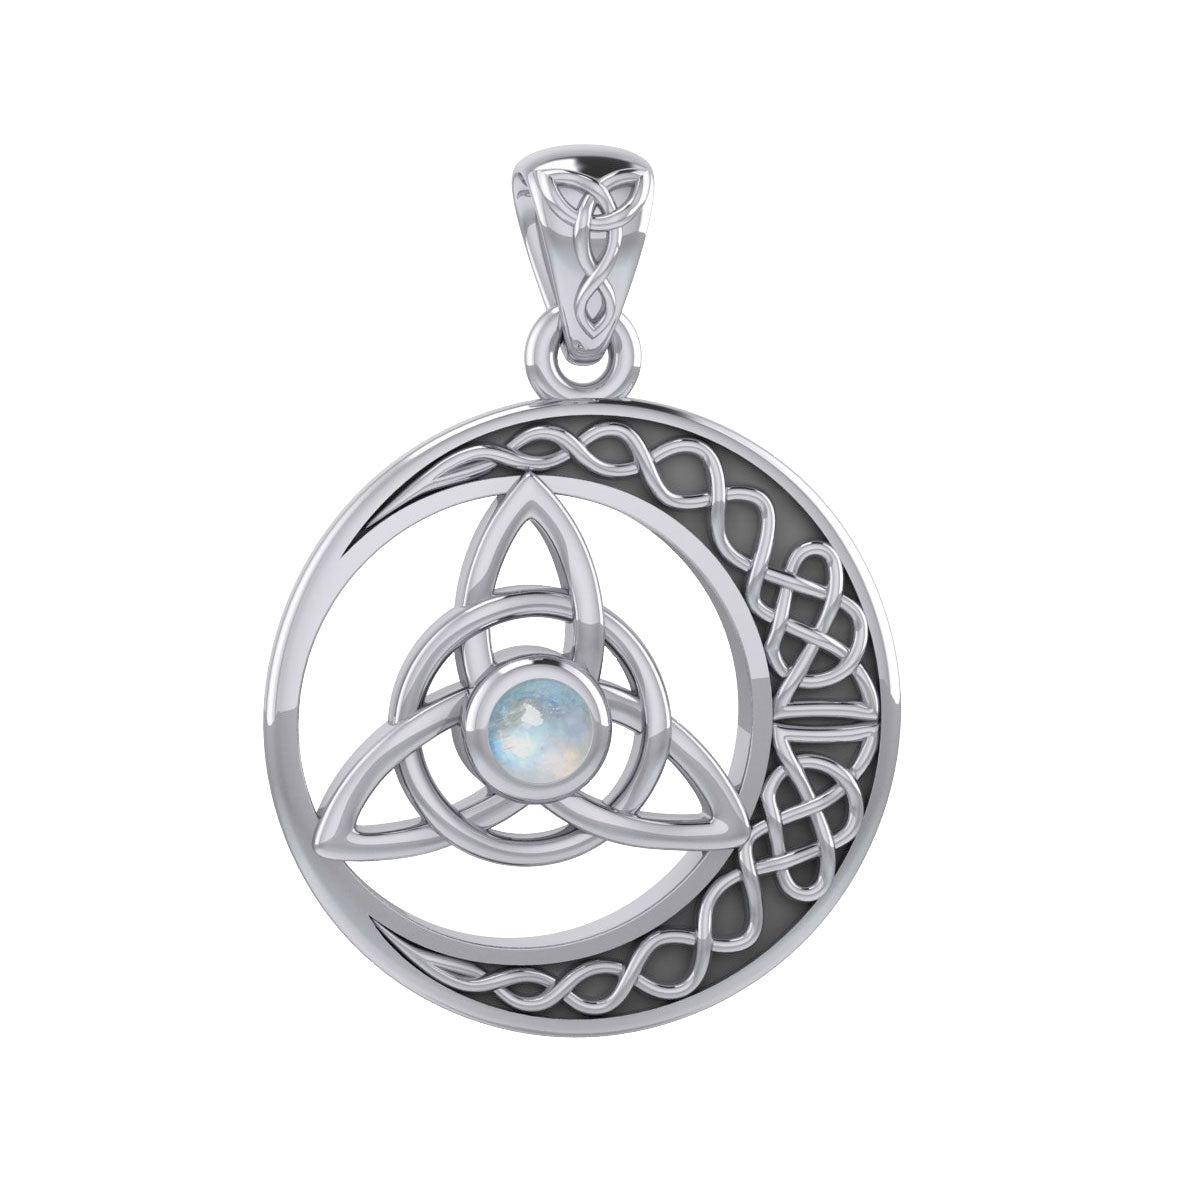 The Celtic Knot Moon and Triquetra Silver Pendant with Stone TPD6052